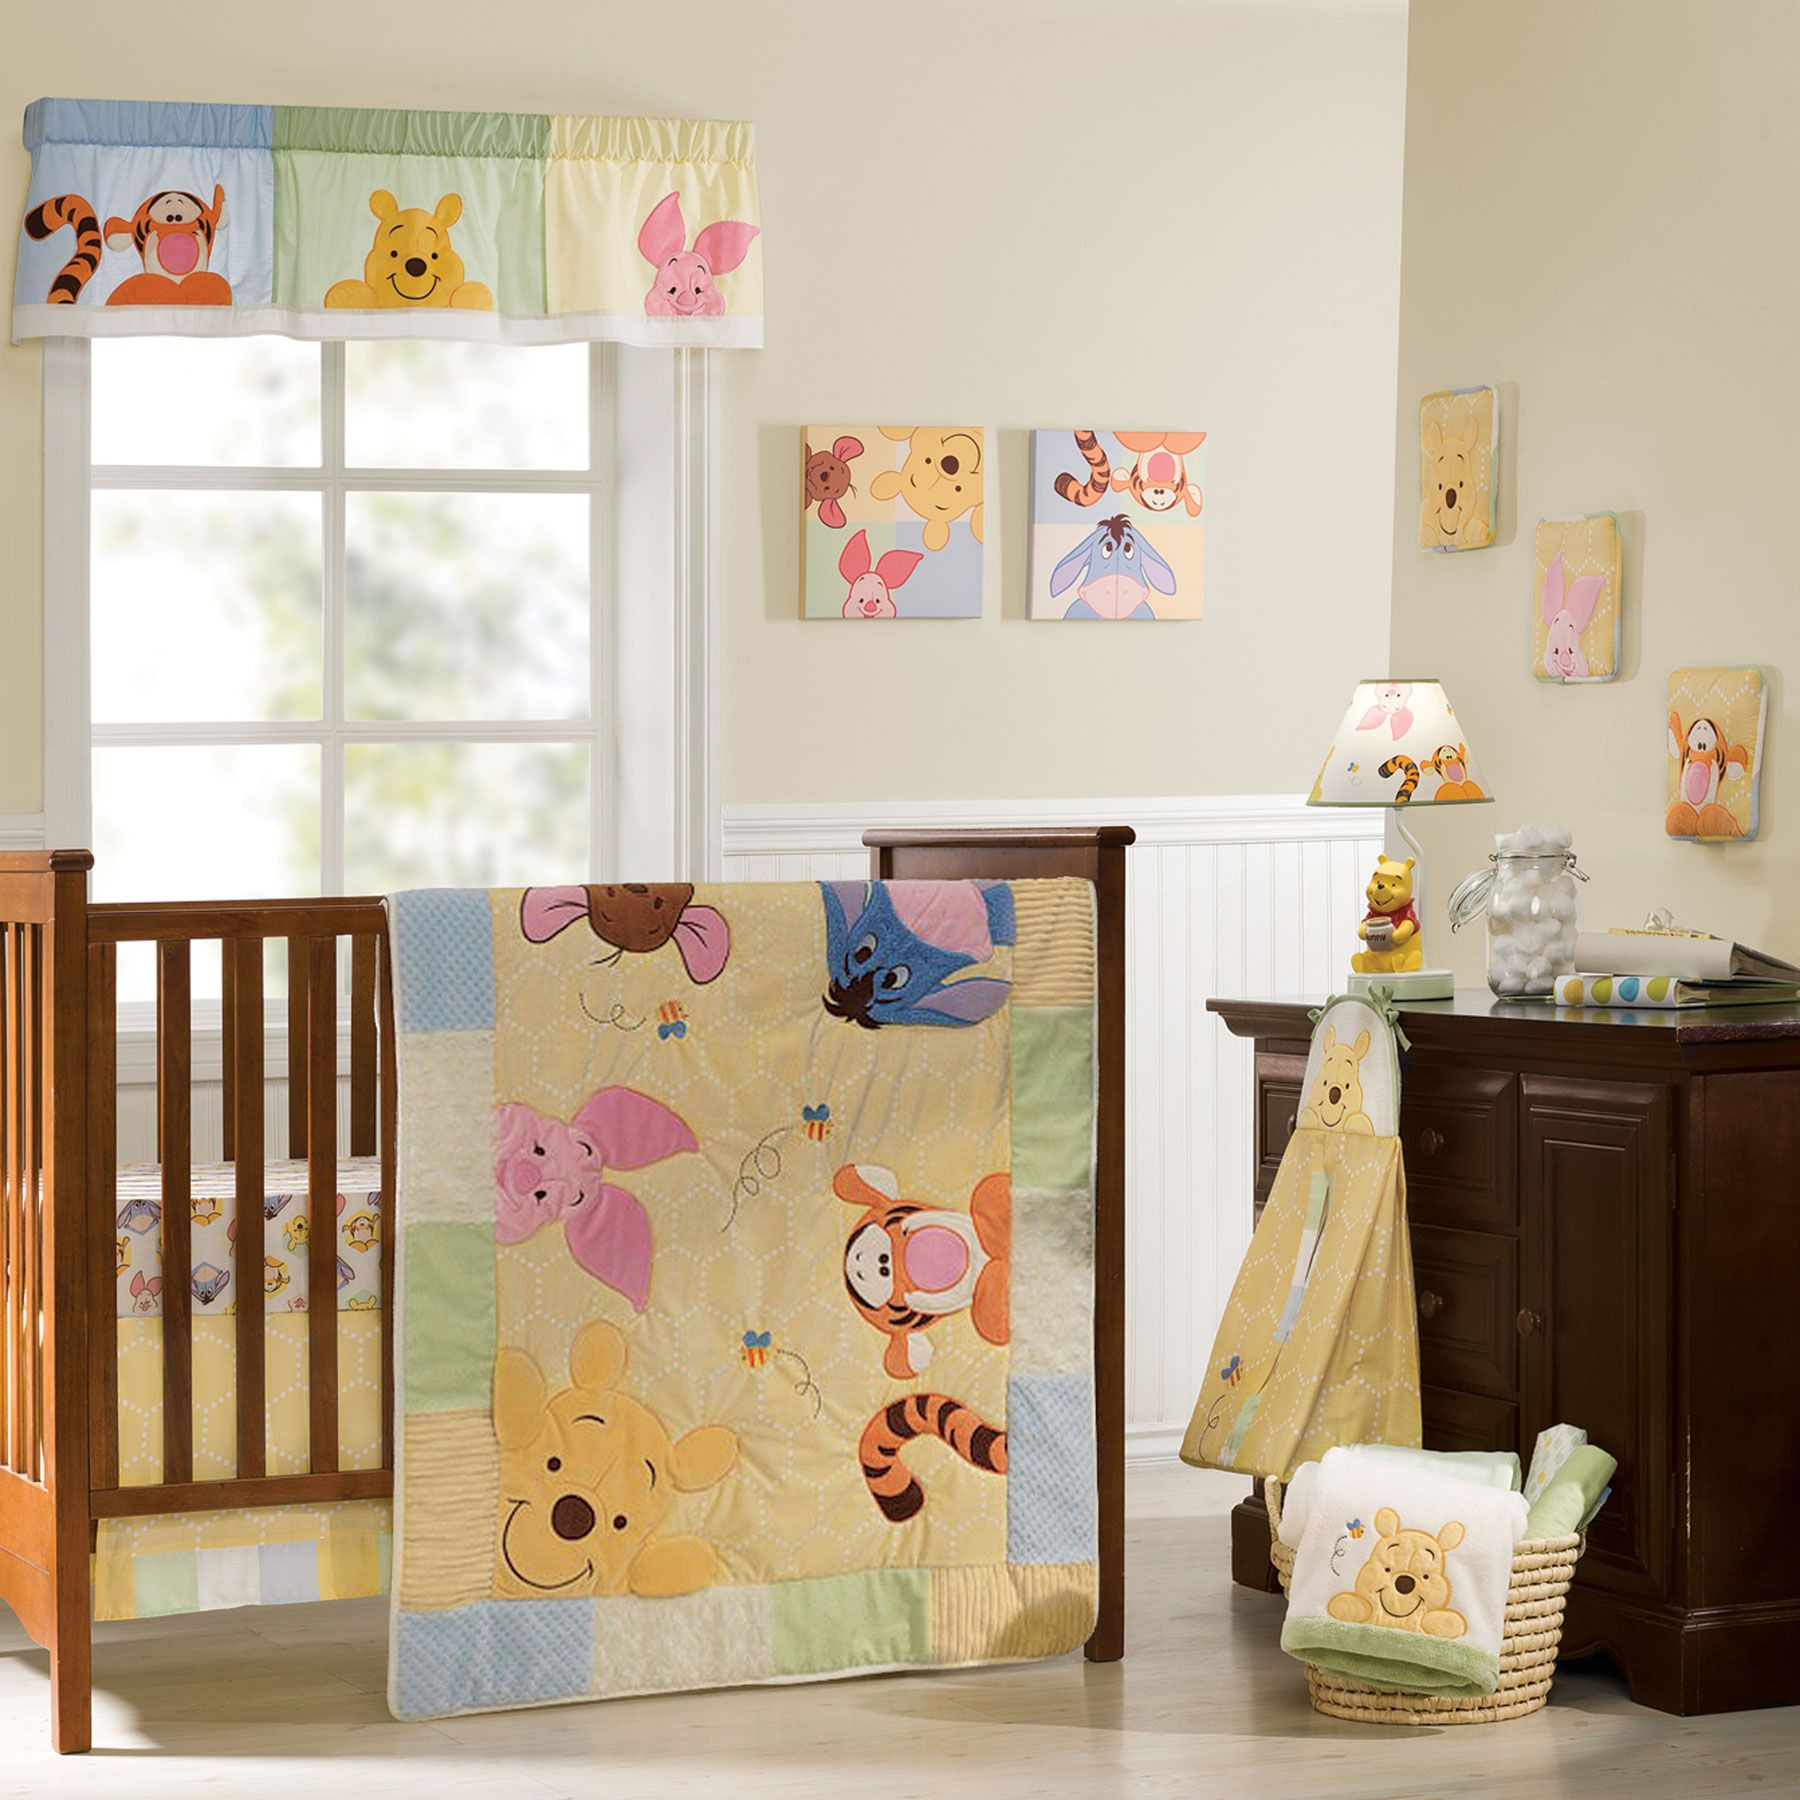 Winnie The Pooh Baby Decor
 15 Disney Inspired Rooms That Will Make You Want To Redo